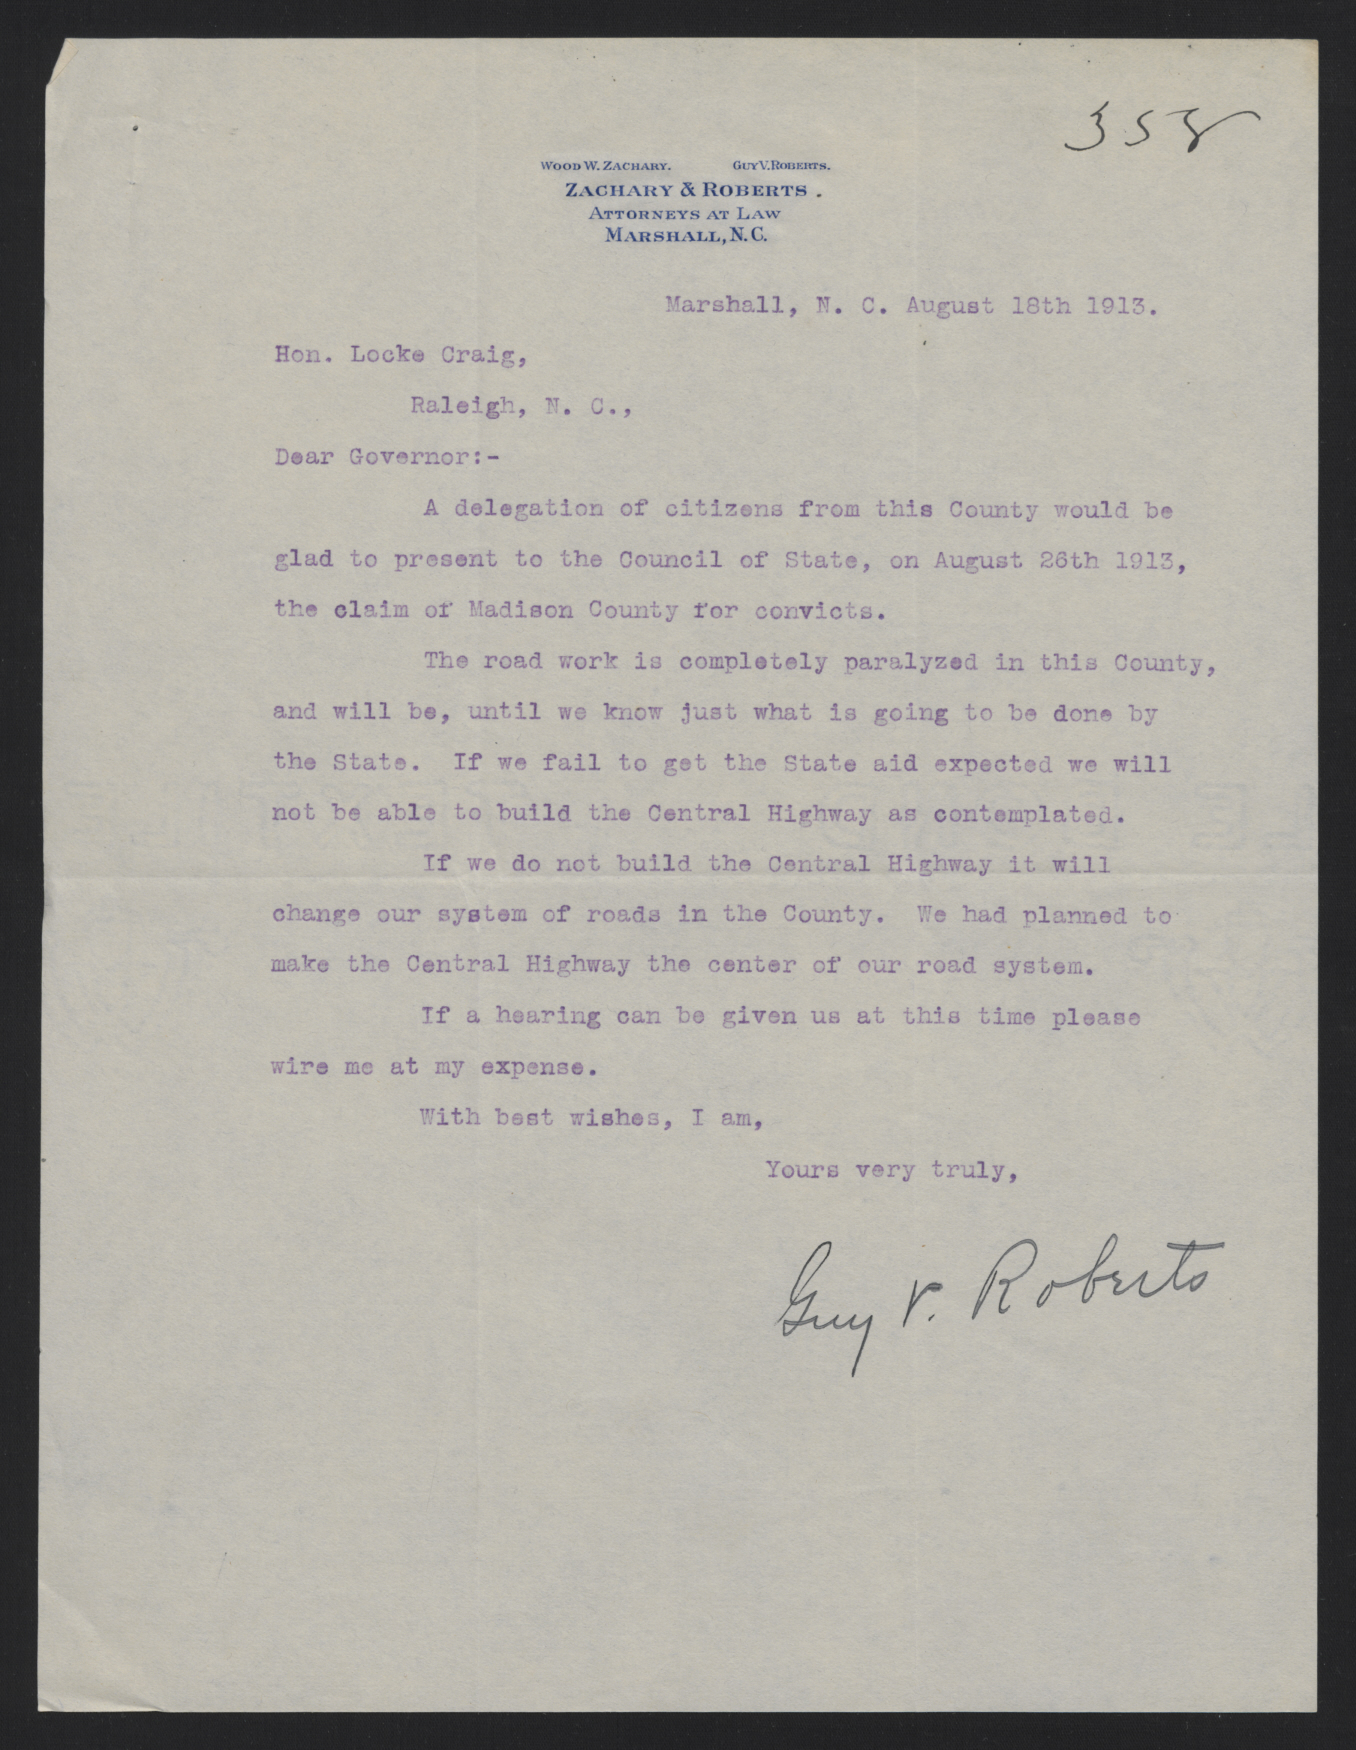 Letter from Roberts to Craig, August 18, 1913